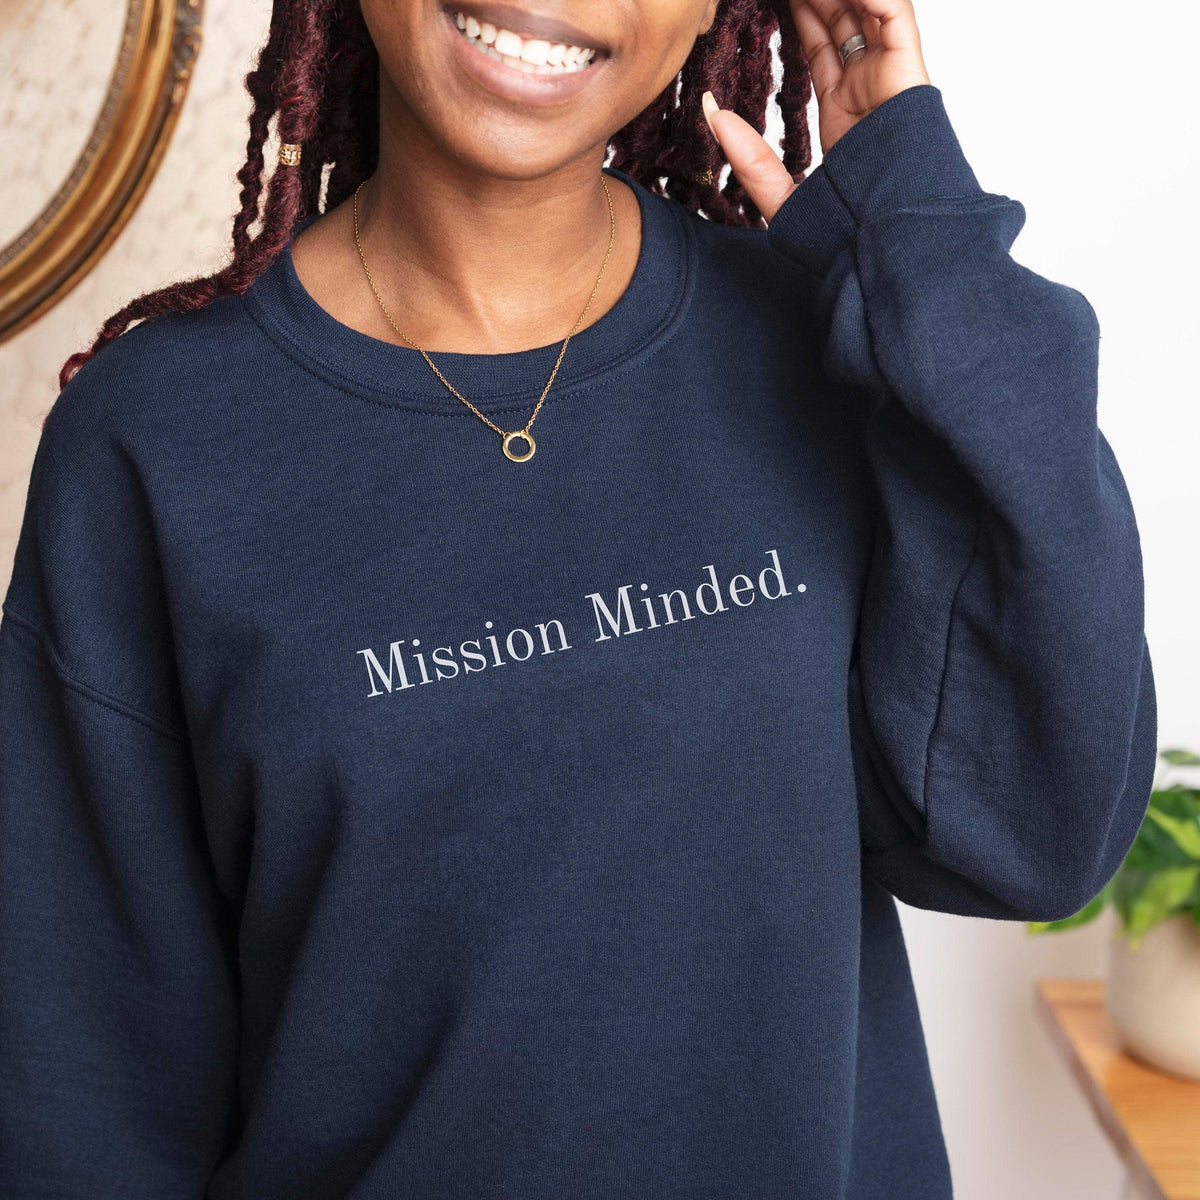 Christian Sweatshirt Woman Custom Christian Gifts for Women Faith Gifts for Her Friend Gift for Woman Jesus Crewneck Gift for Pastor Wife - The Ripple Effect Co.US